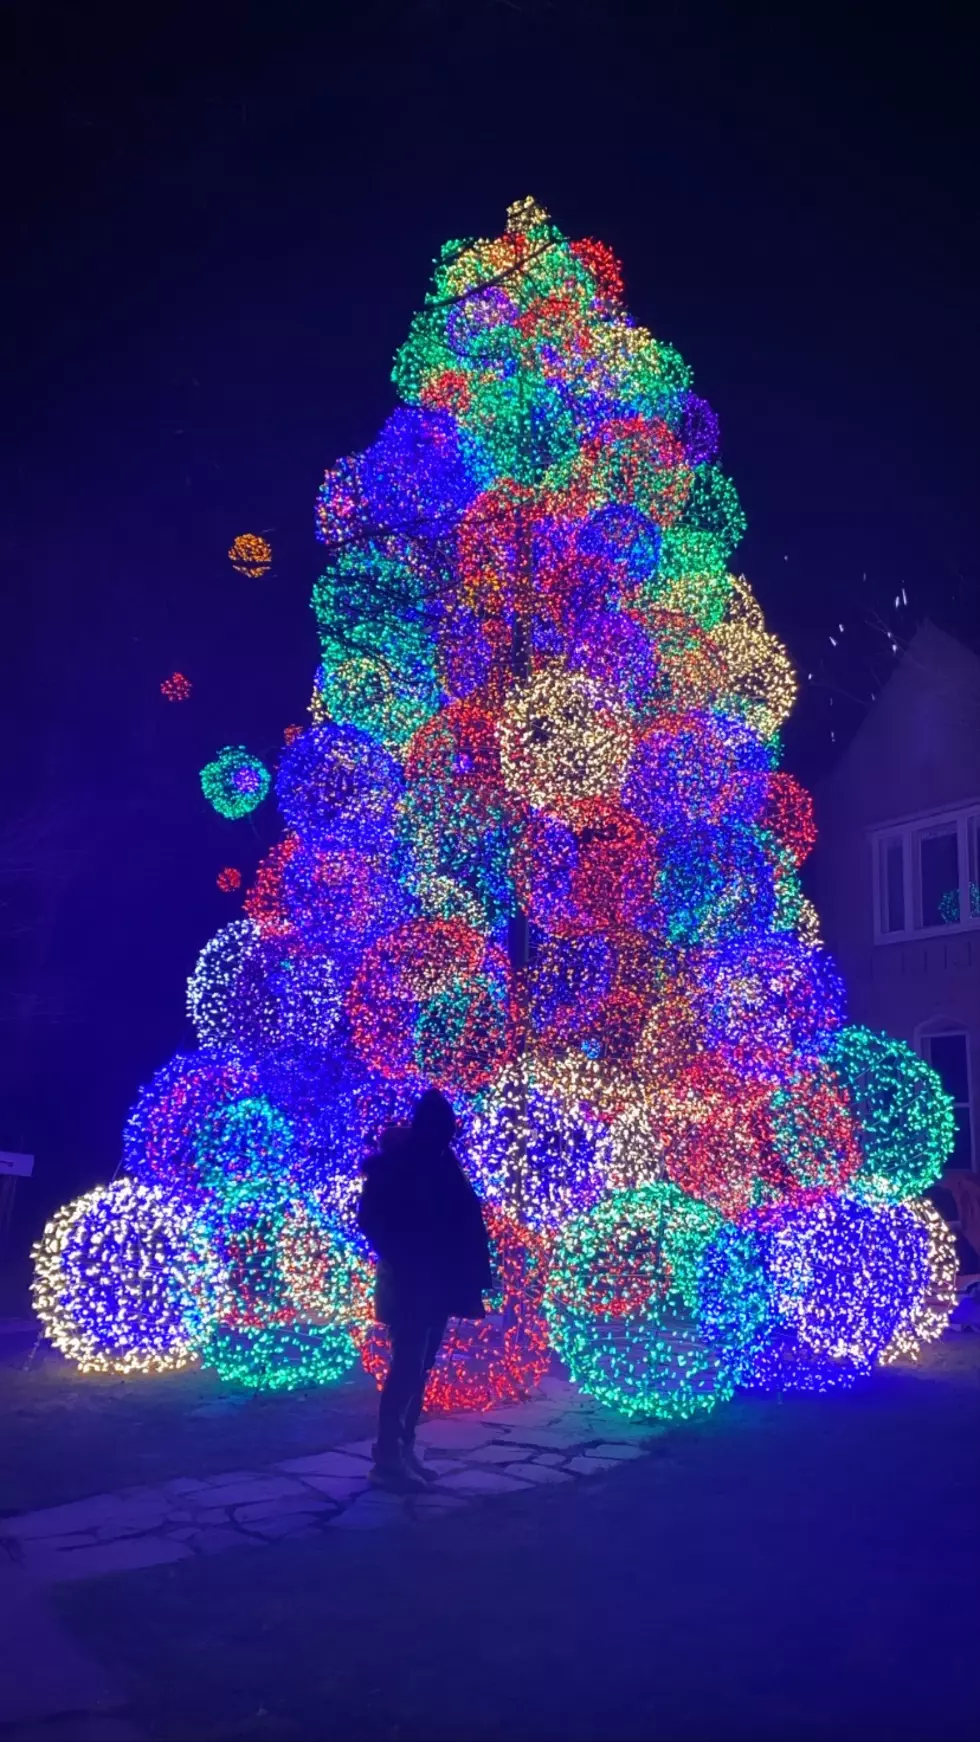 You Have To Go See This Tree in Buffalo